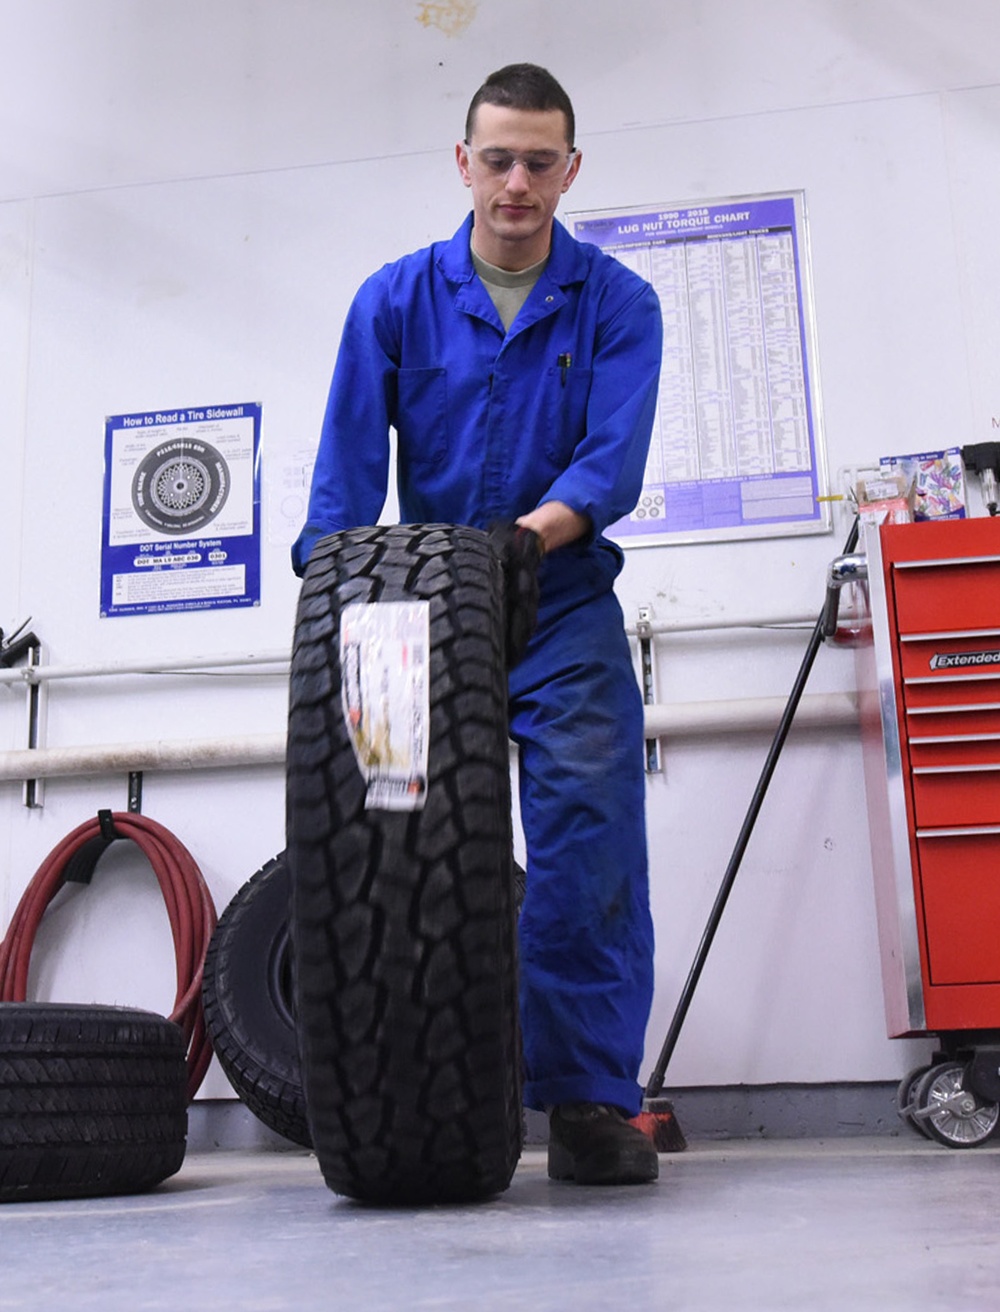 Tire shop helps the mission